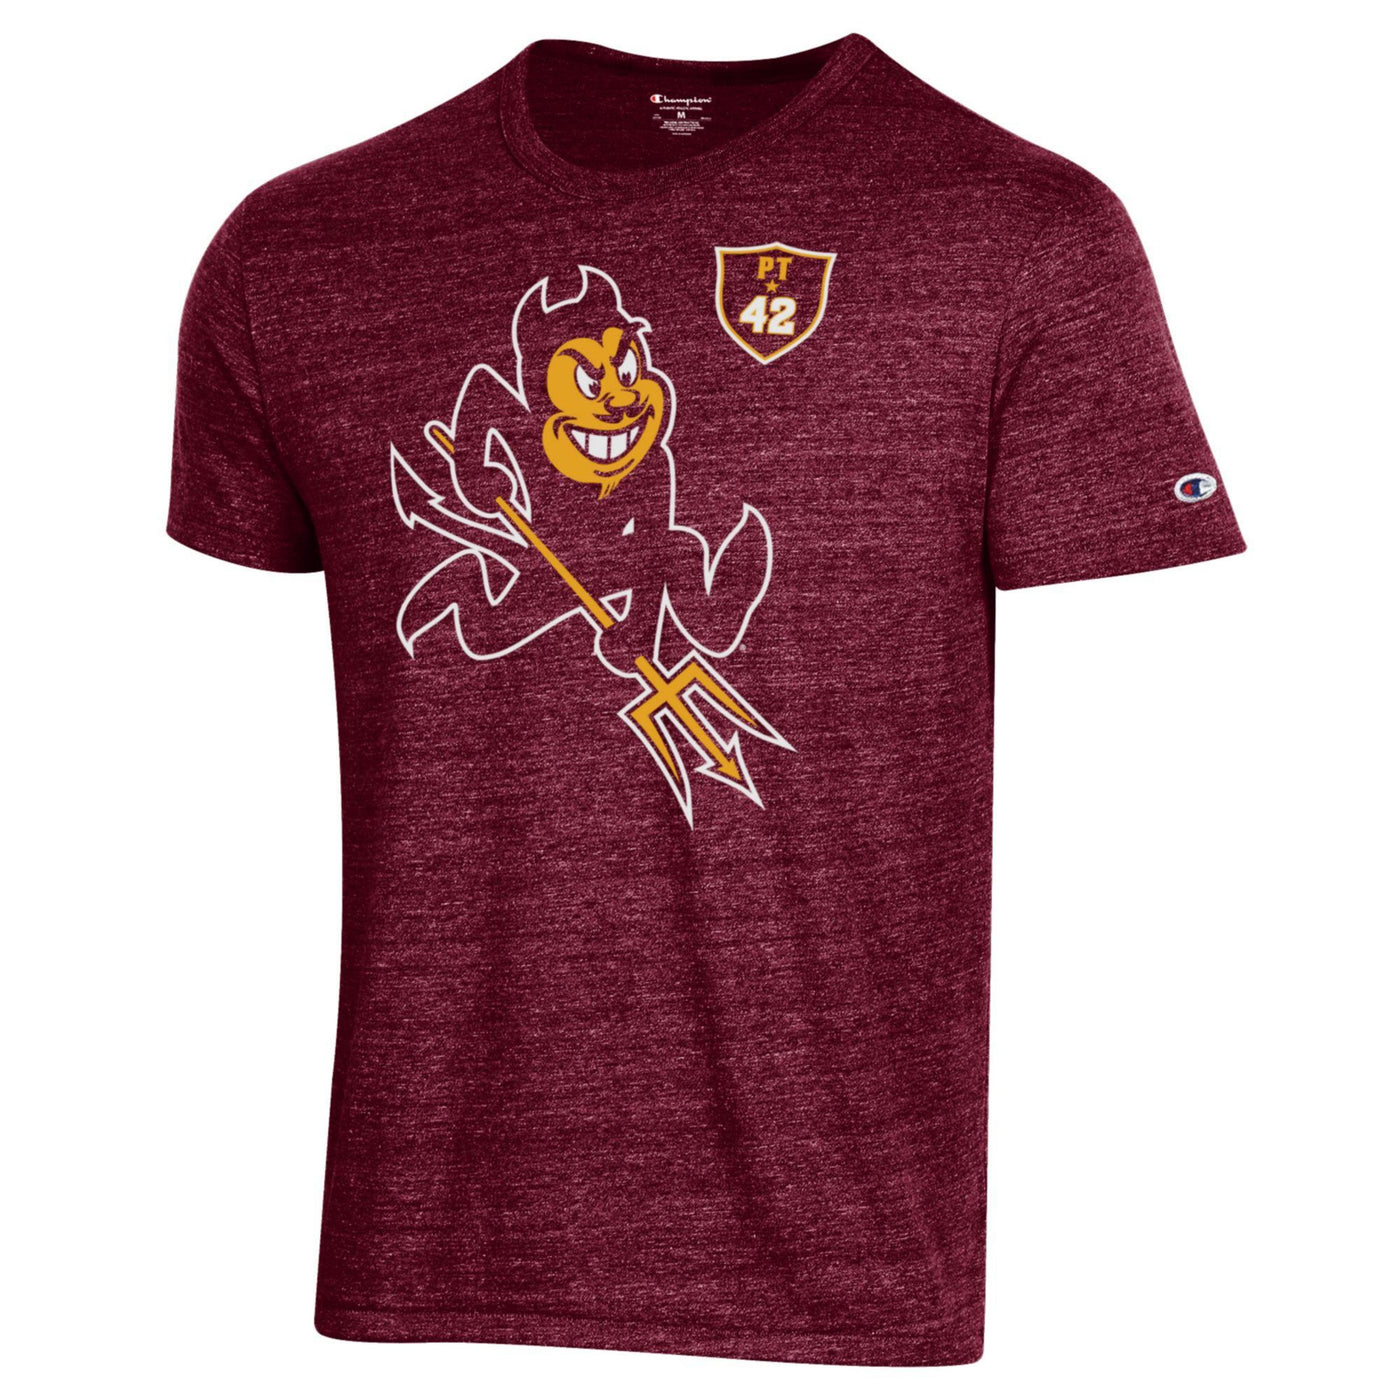 ASU maroon t-shirt with a large sparky mascot on the front and the small  PT 42 logo on the upper corner of chest.